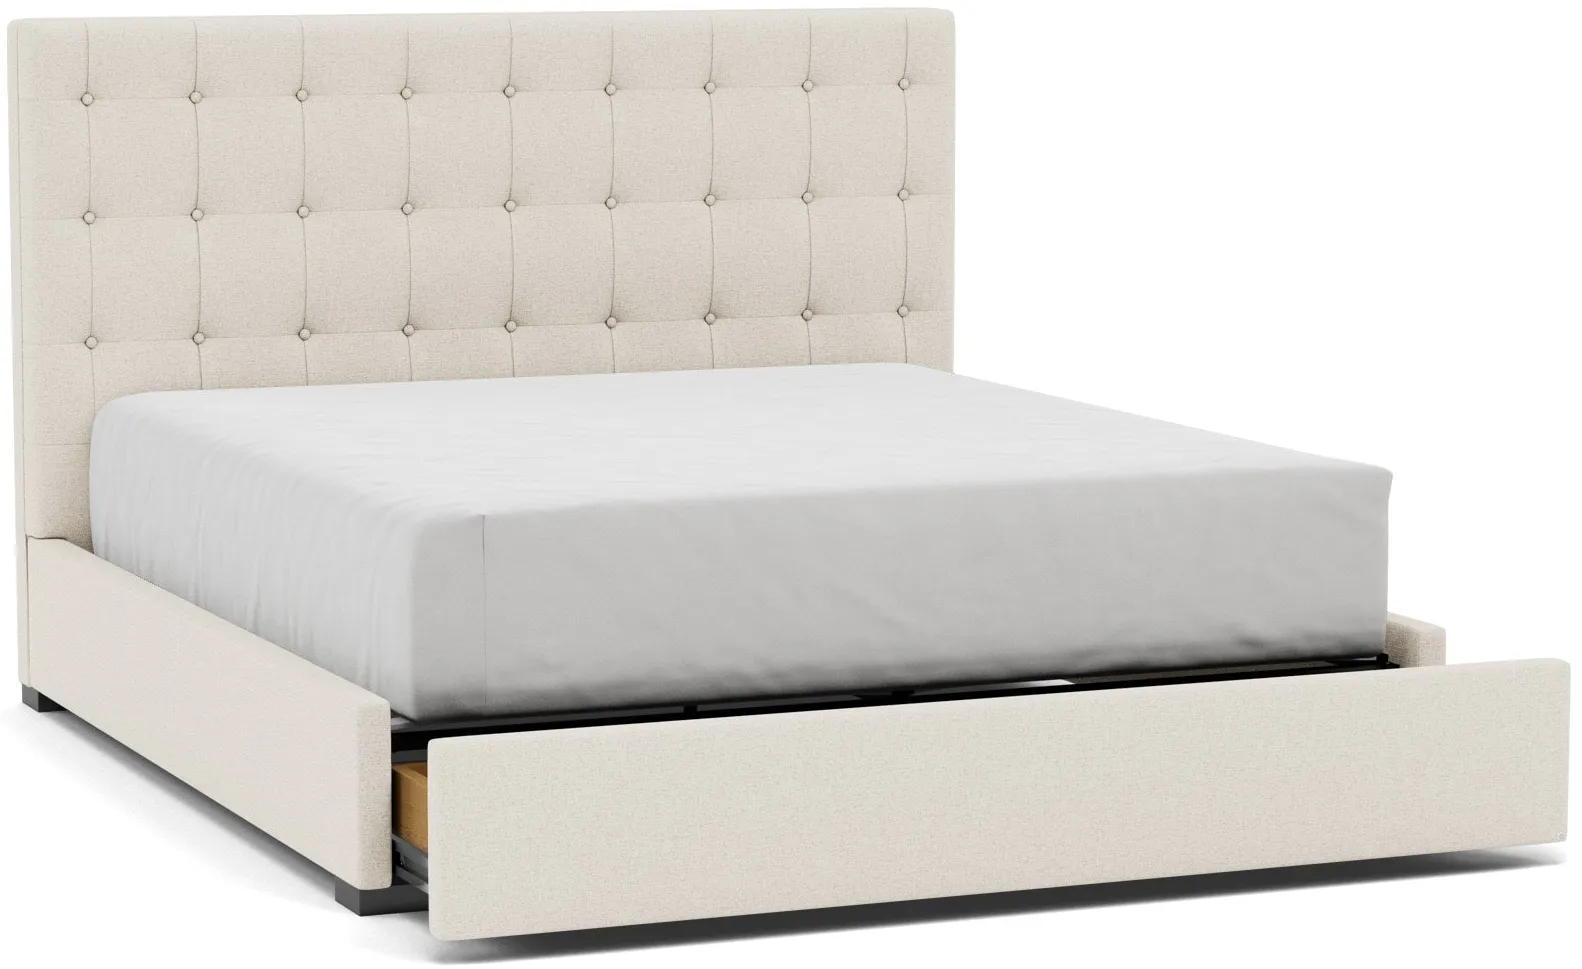 Abby King Upholstered Storage Bed in Merit Pearl